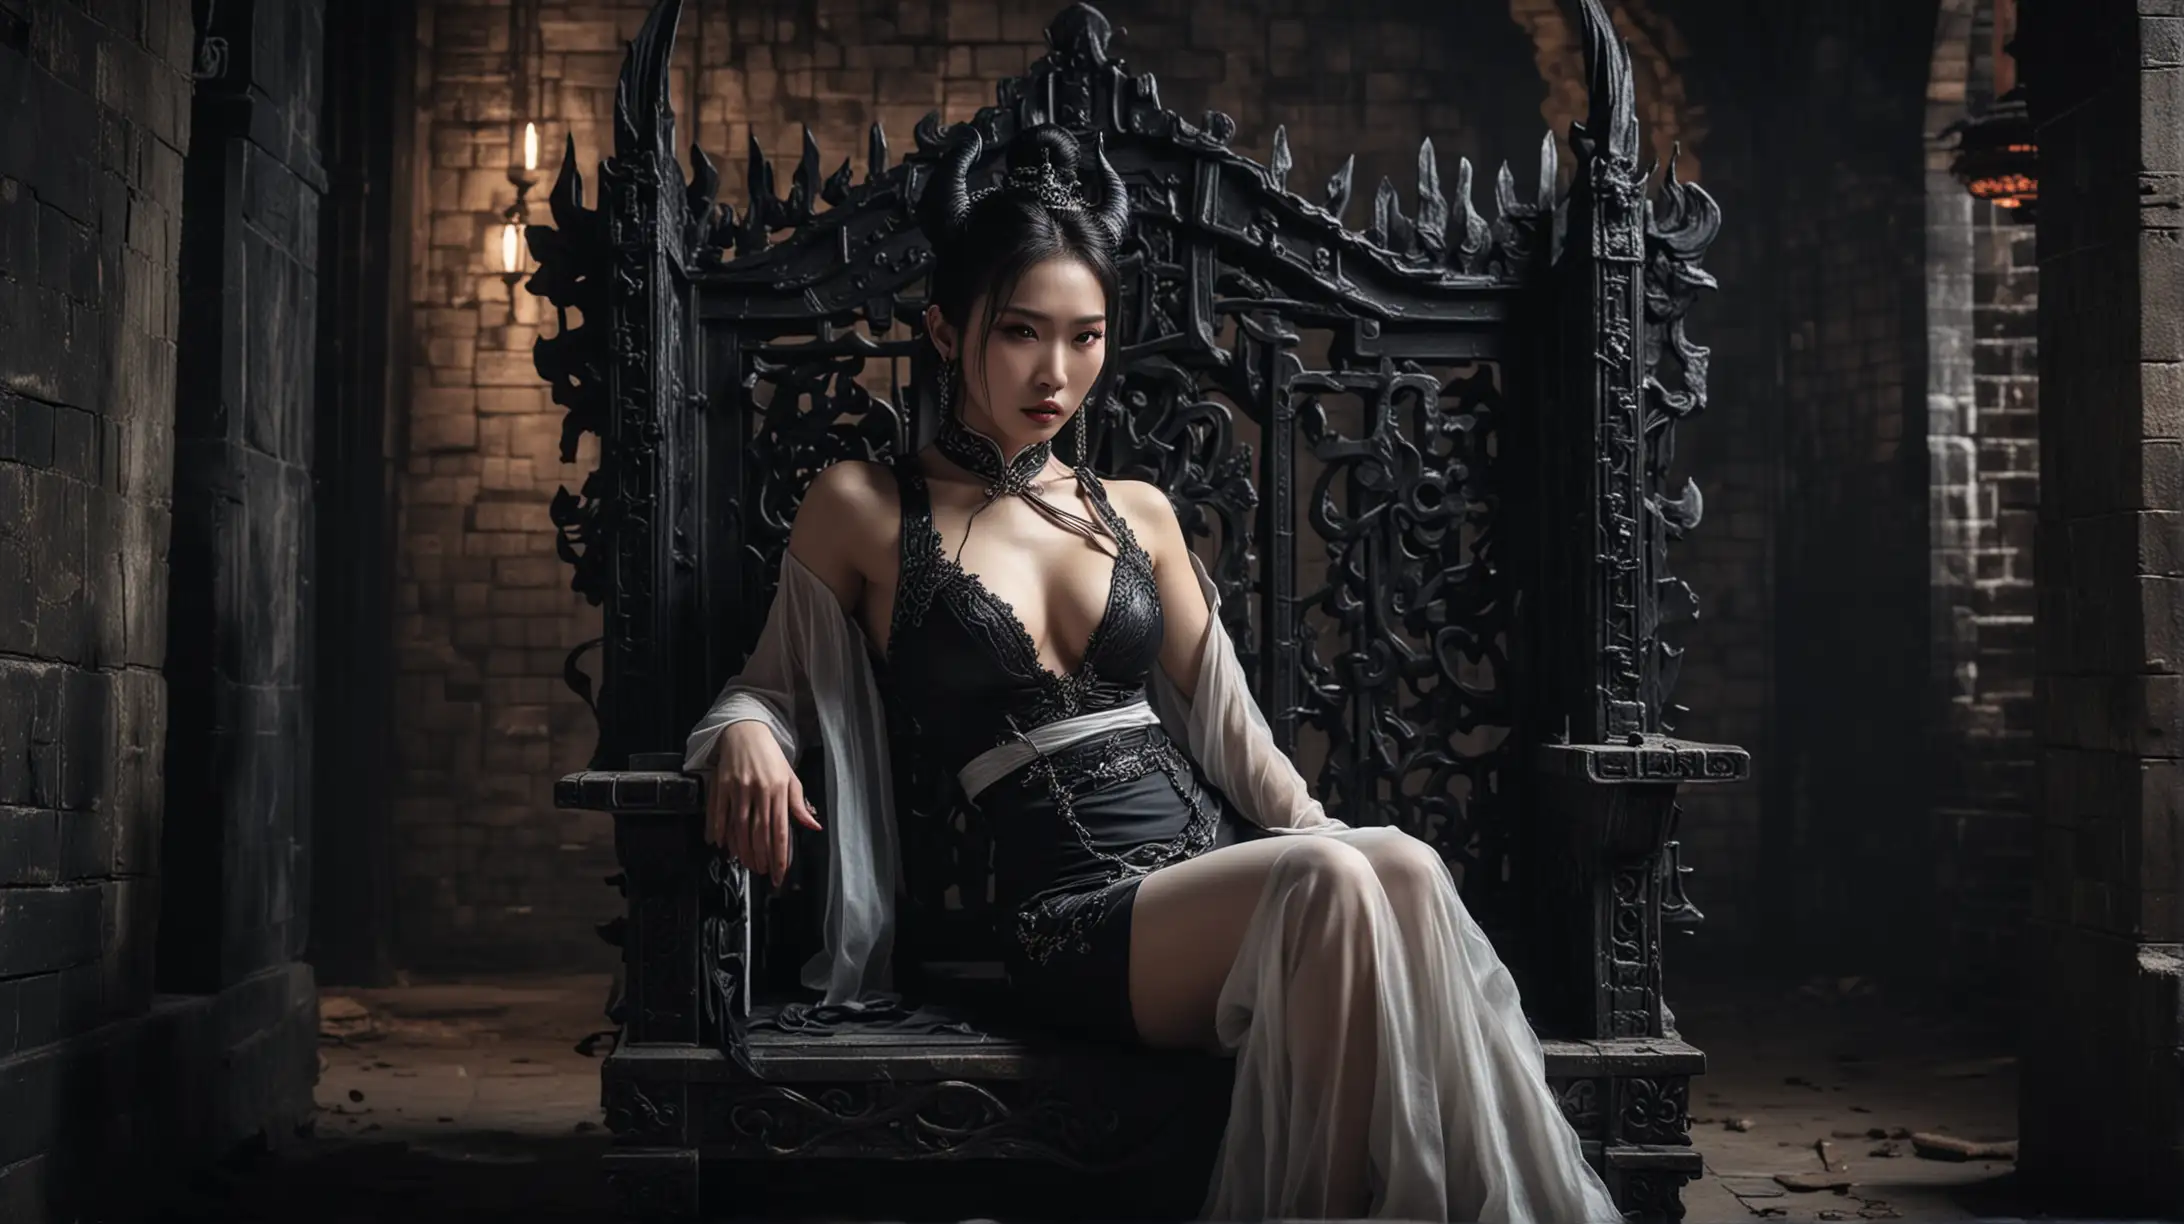 Sensual Gothic Chinese Demon Queen on Throne in Dungeon Chamber